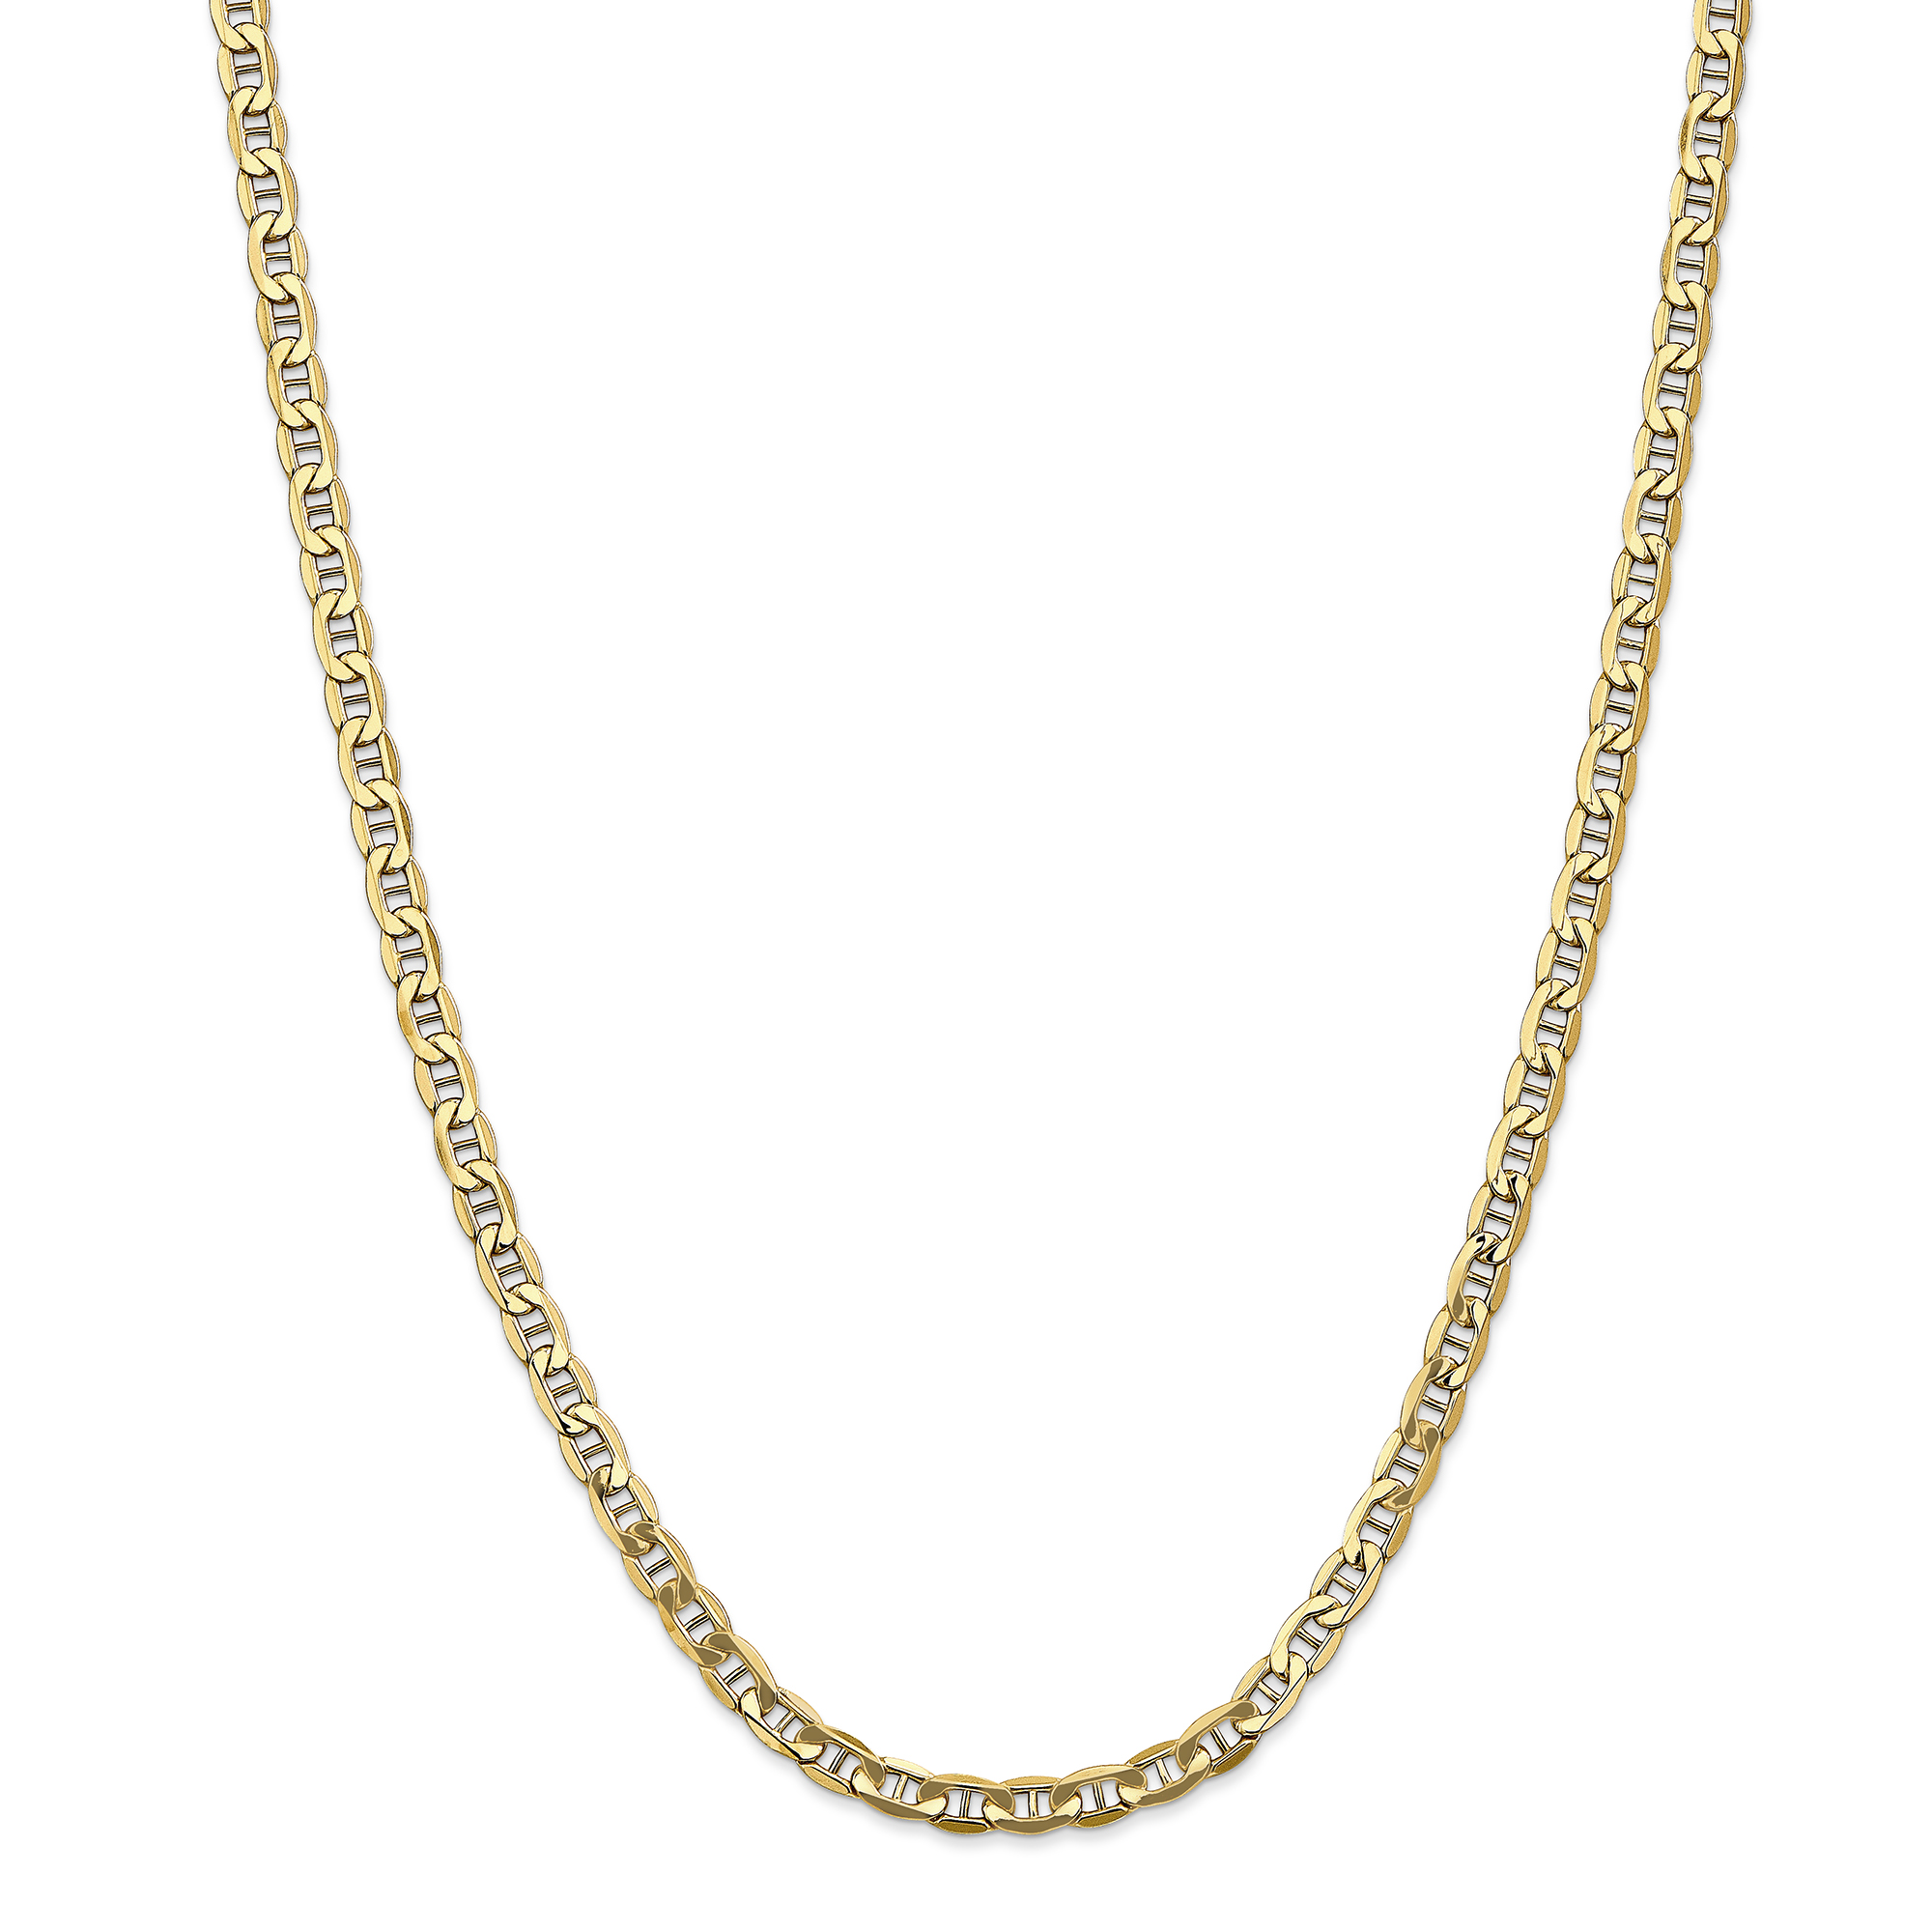 Primal Gold 14 Karat Yellow Gold 4.75mm Semi-Solid Anchor Chain - image 1 of 7